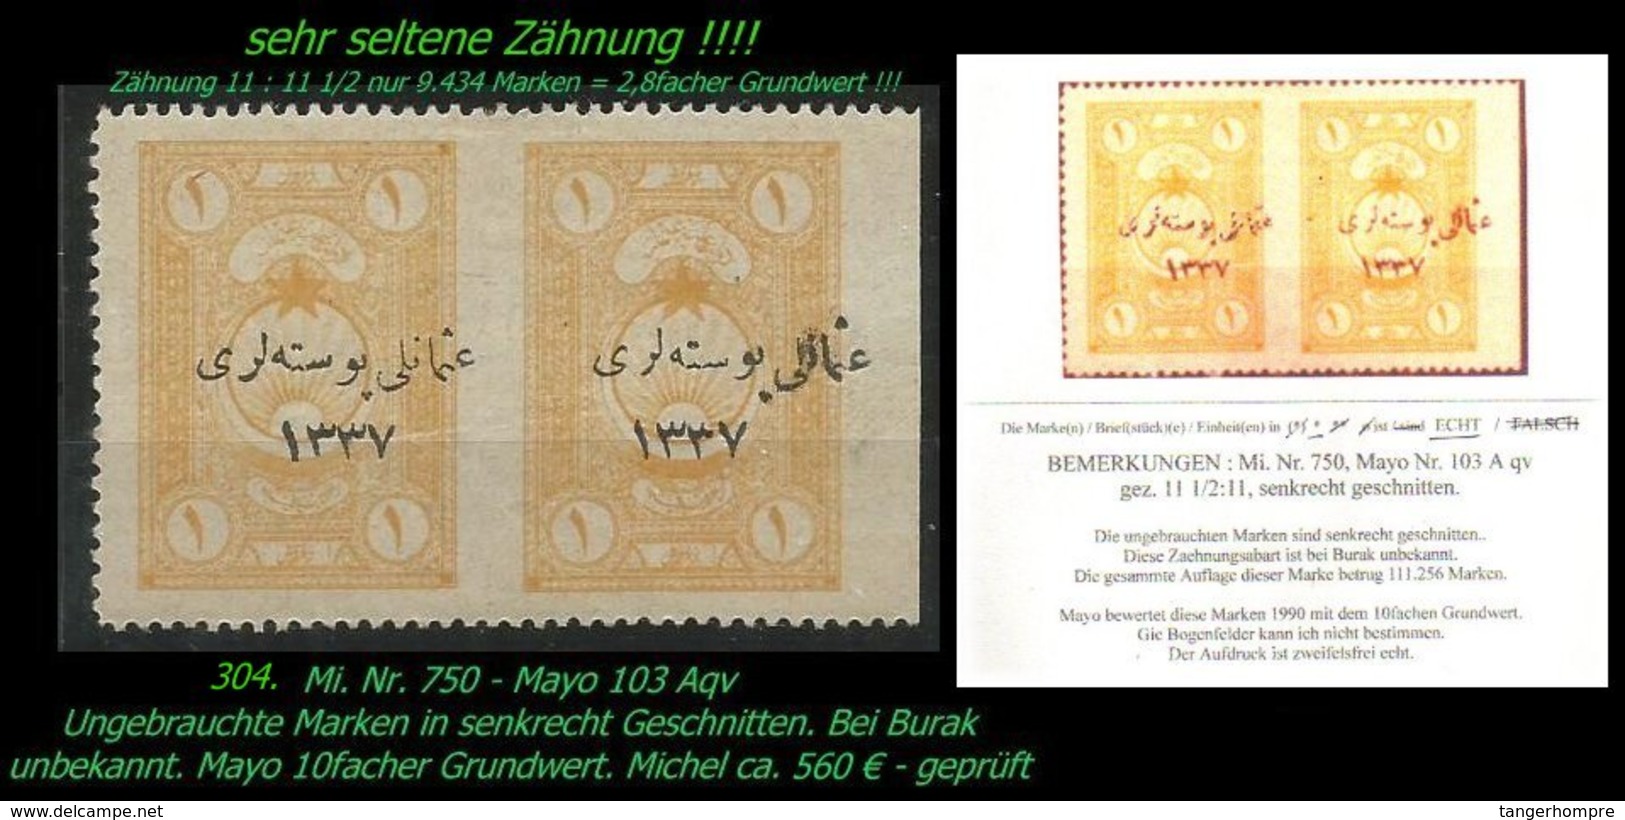 EARLY OTTOMAN SPECIALIZED FOR SPECIALIST, SEE...Mi. Nr. 750 - Mayo 103 Aqv - Teilgezähnt -RRR- - 1920-21 Anatolia